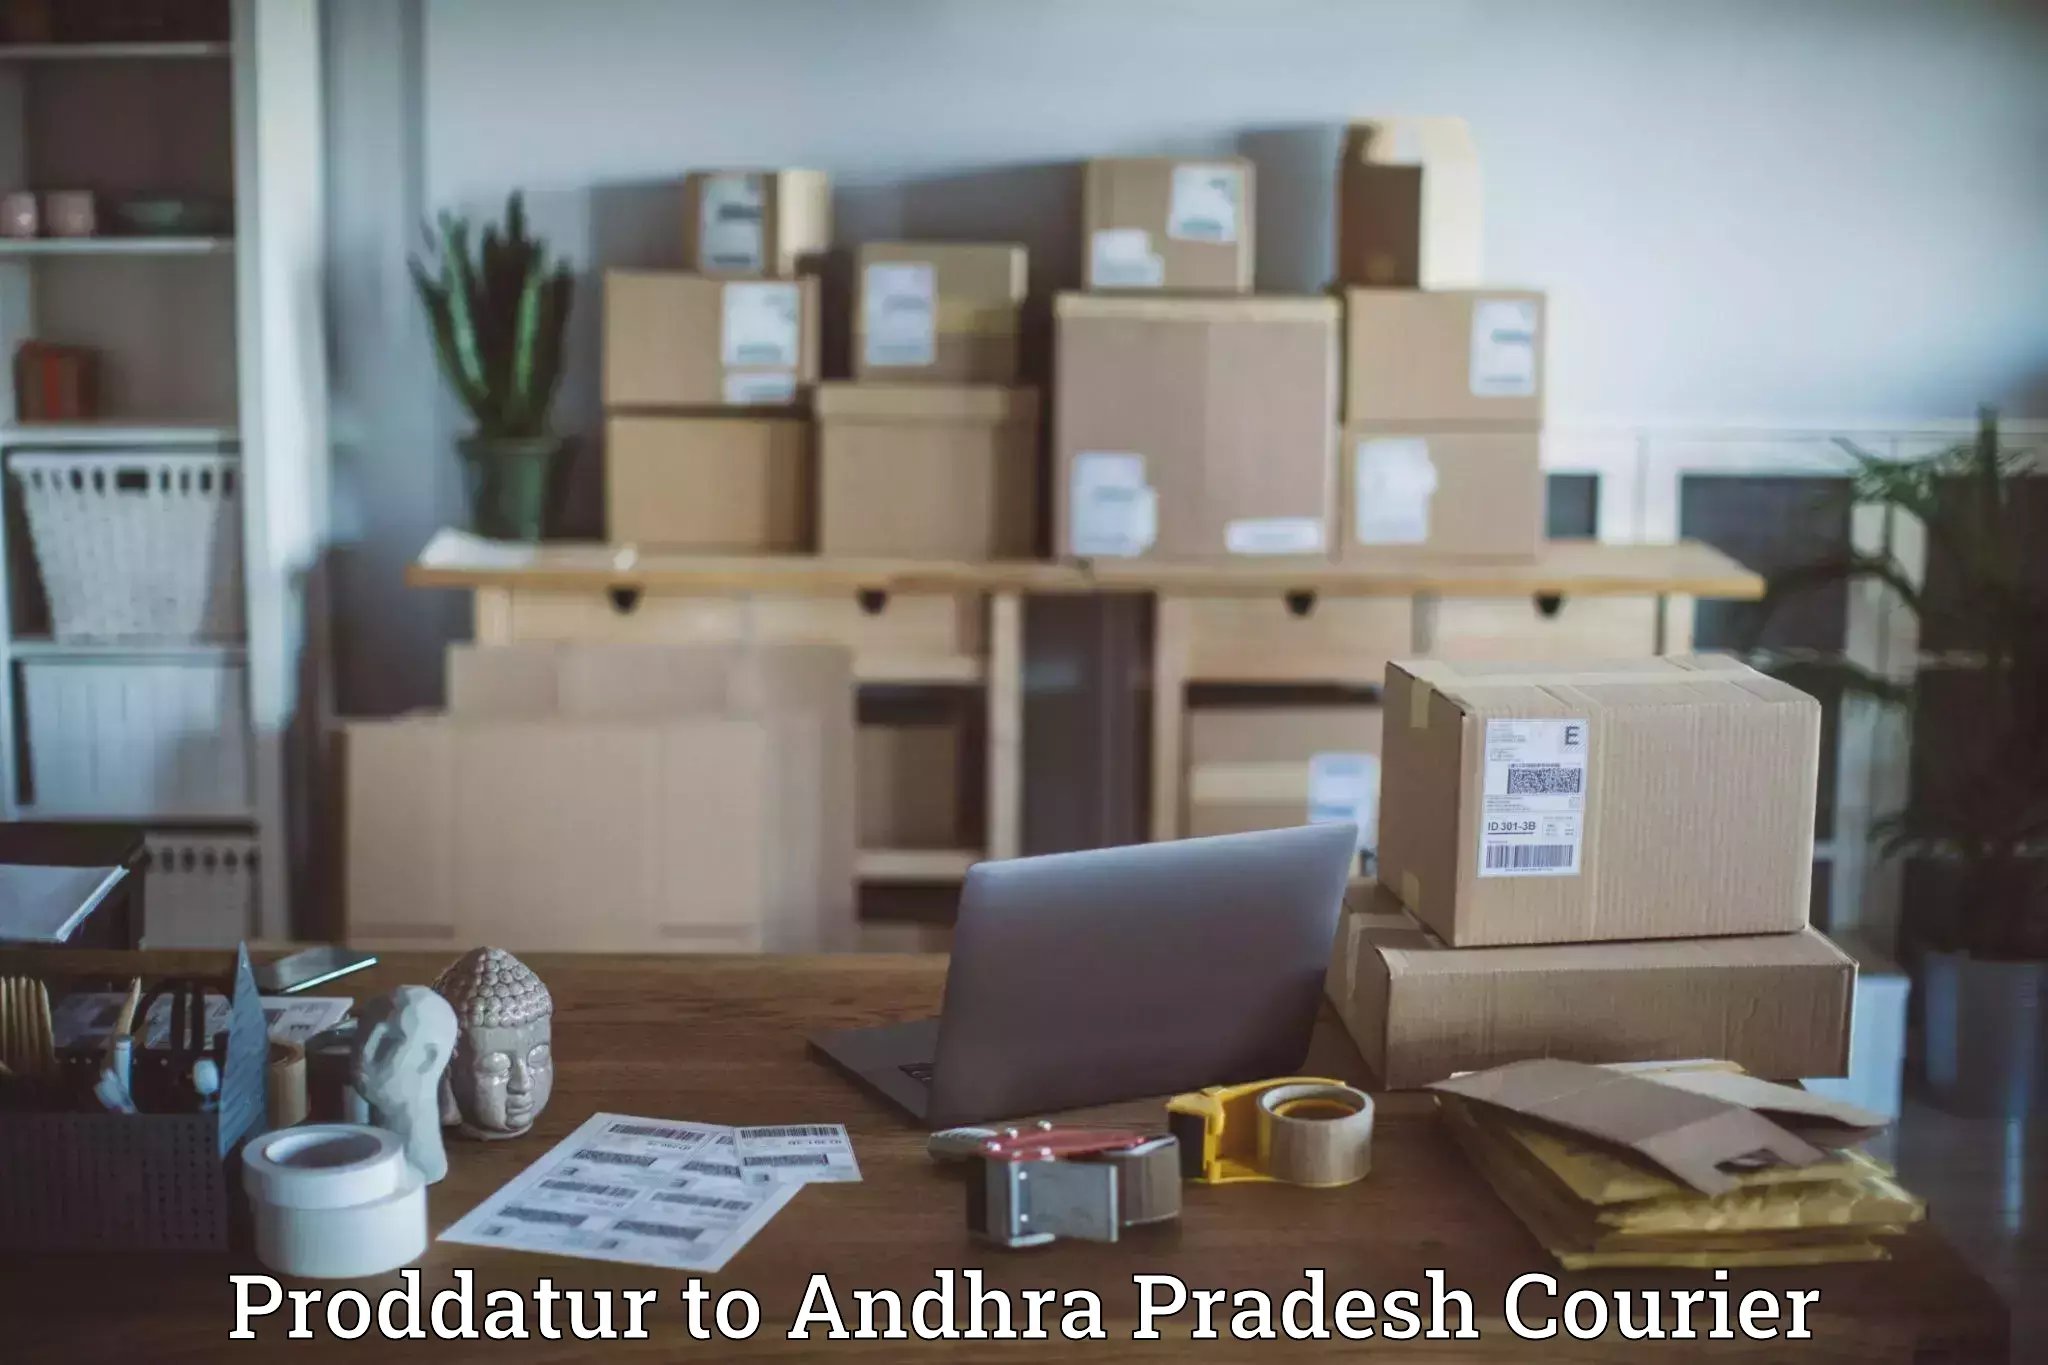 Sustainable shipping practices Proddatur to Andhra Pradesh